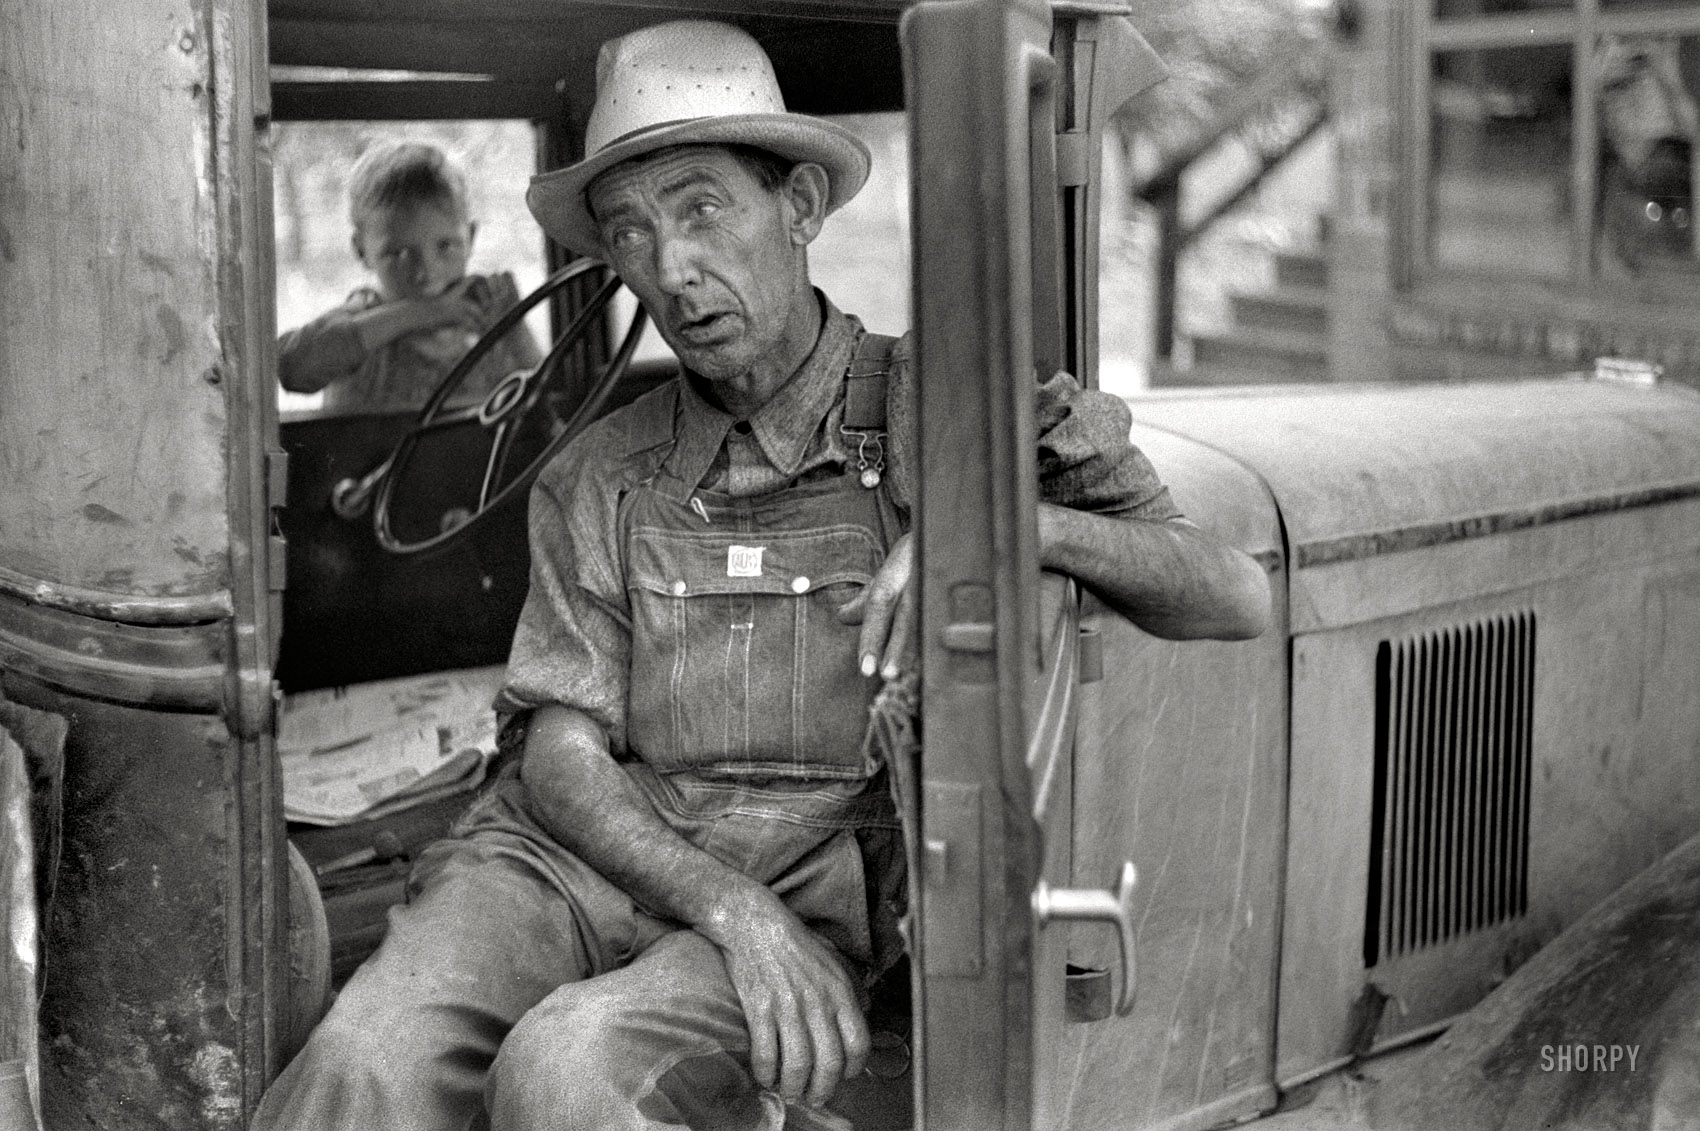 July 1940. "Arkansas farmer now picking fruit in Berrien County, Michigan." Wearing Tuf-Nut overalls. Photo by John Vachon for the FSA. View full size.